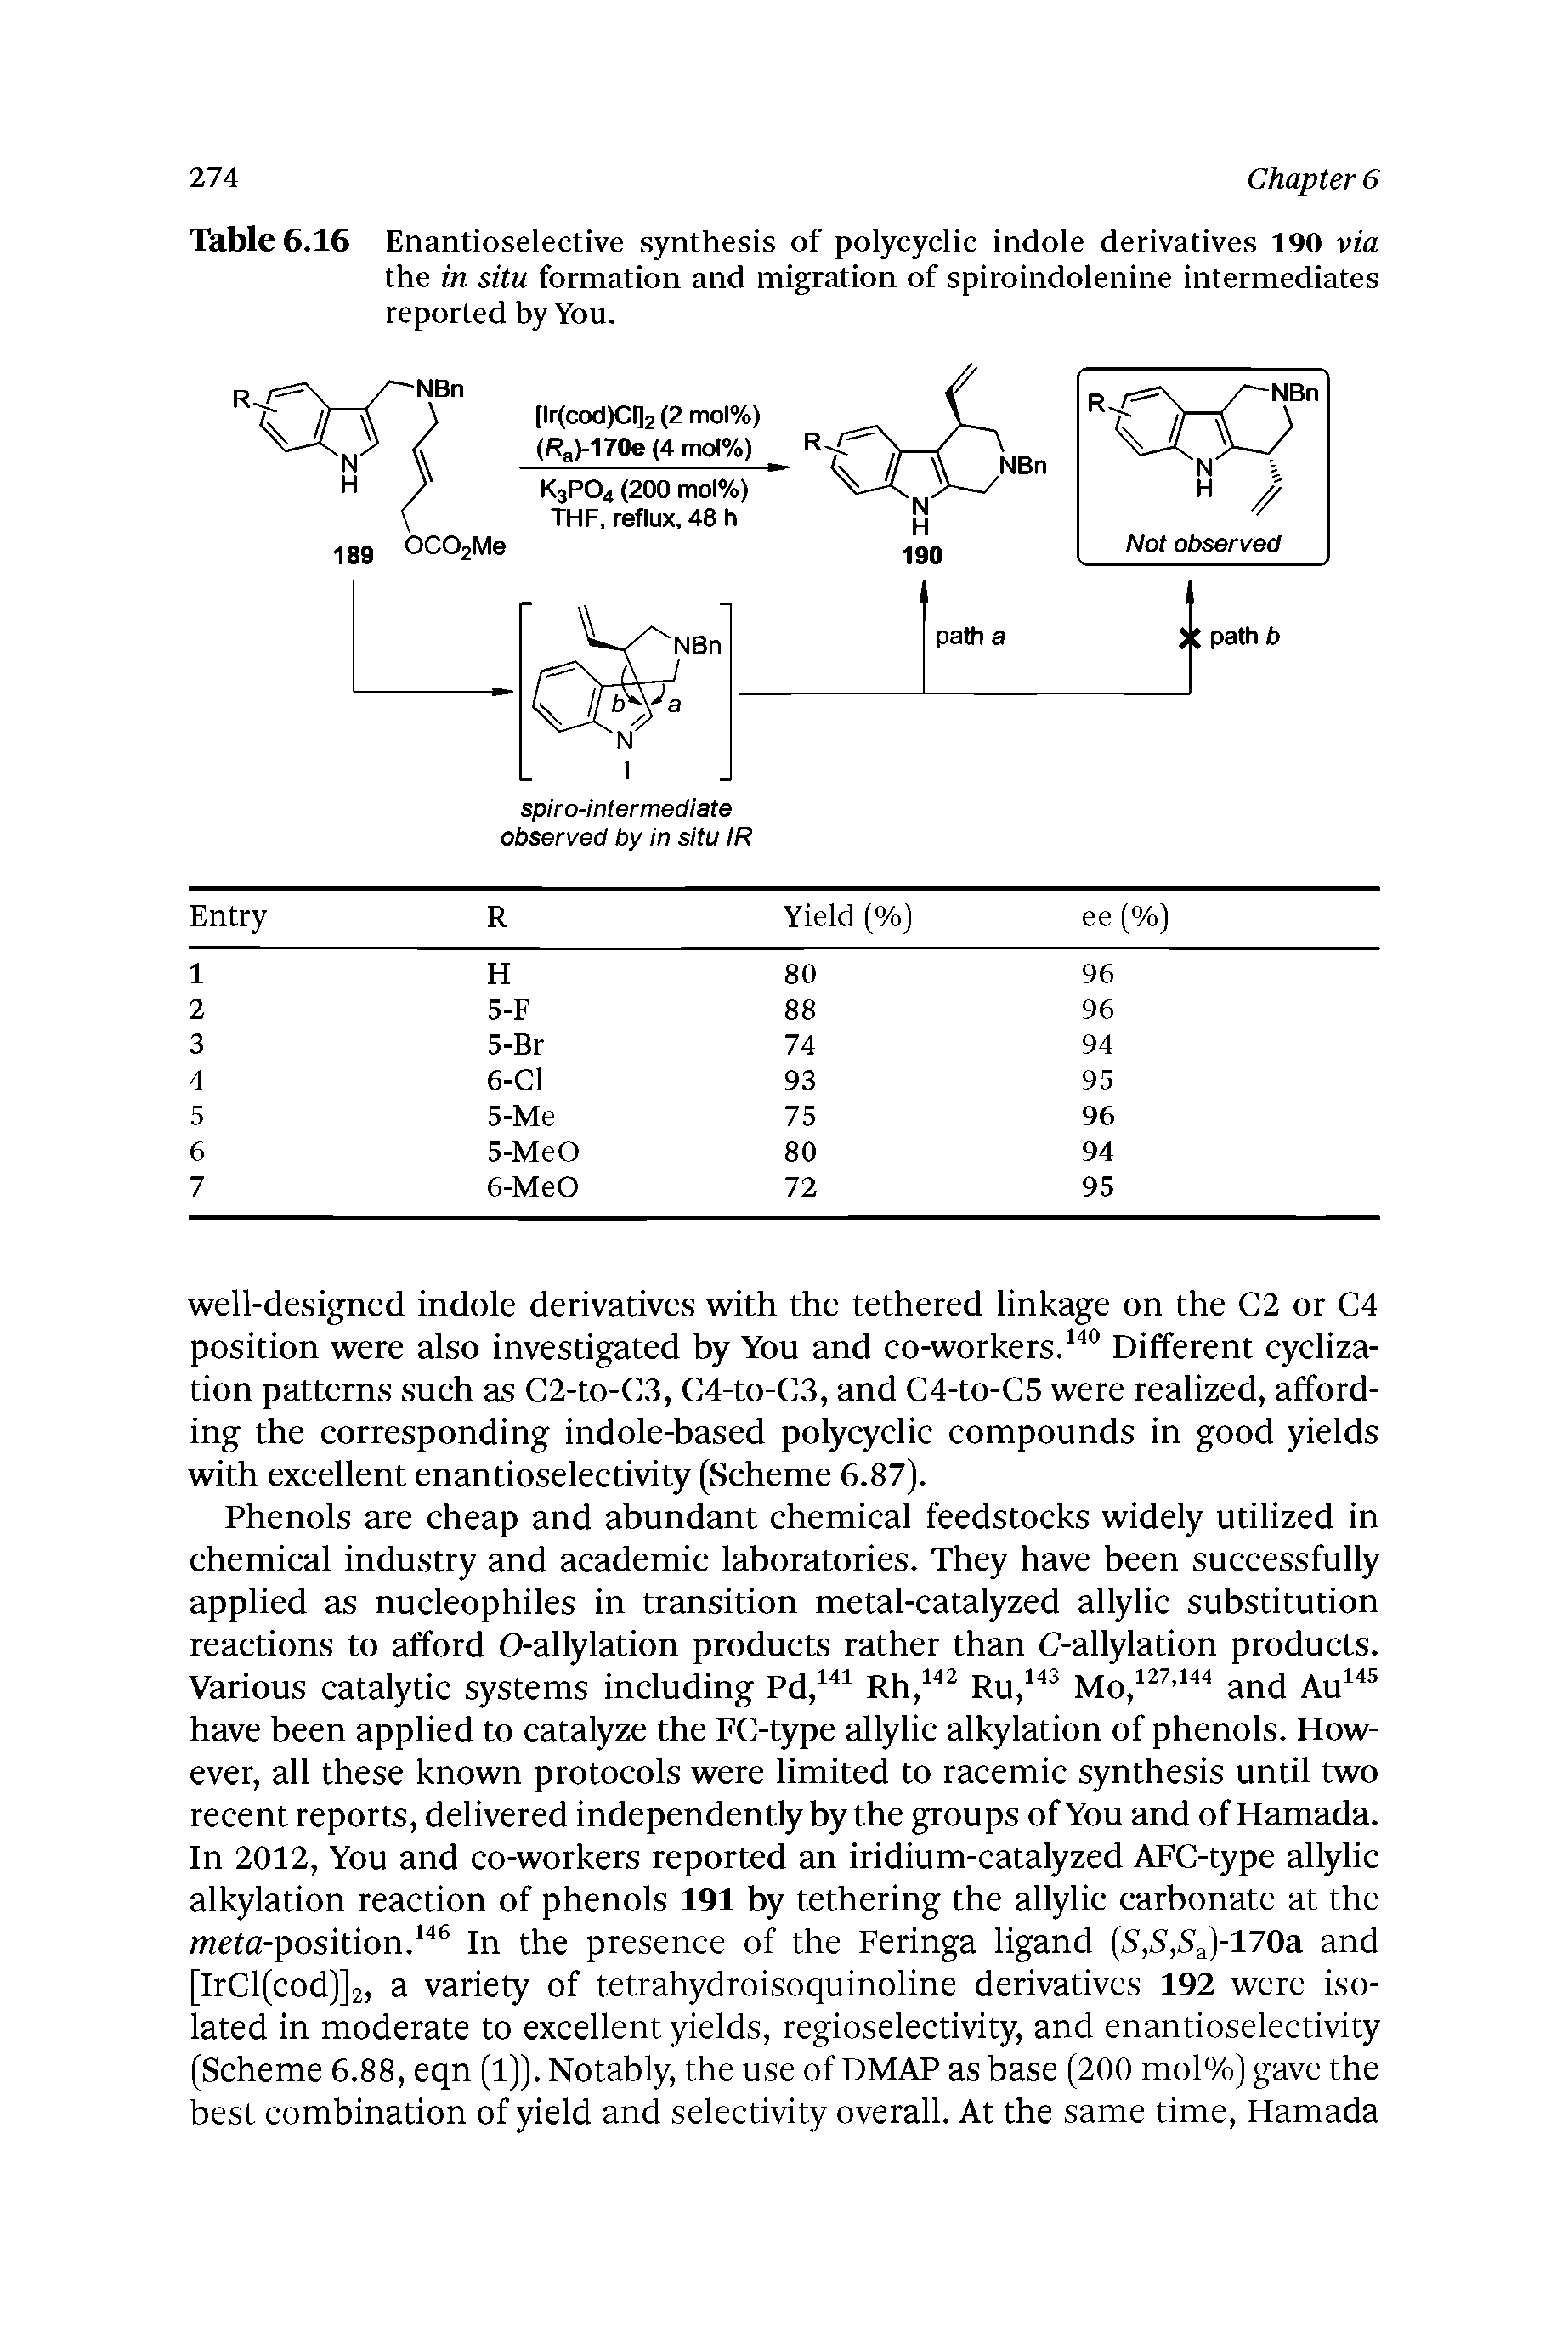 Table 6.16 Enantioselective synthesis of polycyclic indole derivatives 190 via the in situ formation and migration of spiroindolenine intermediates reported by You.